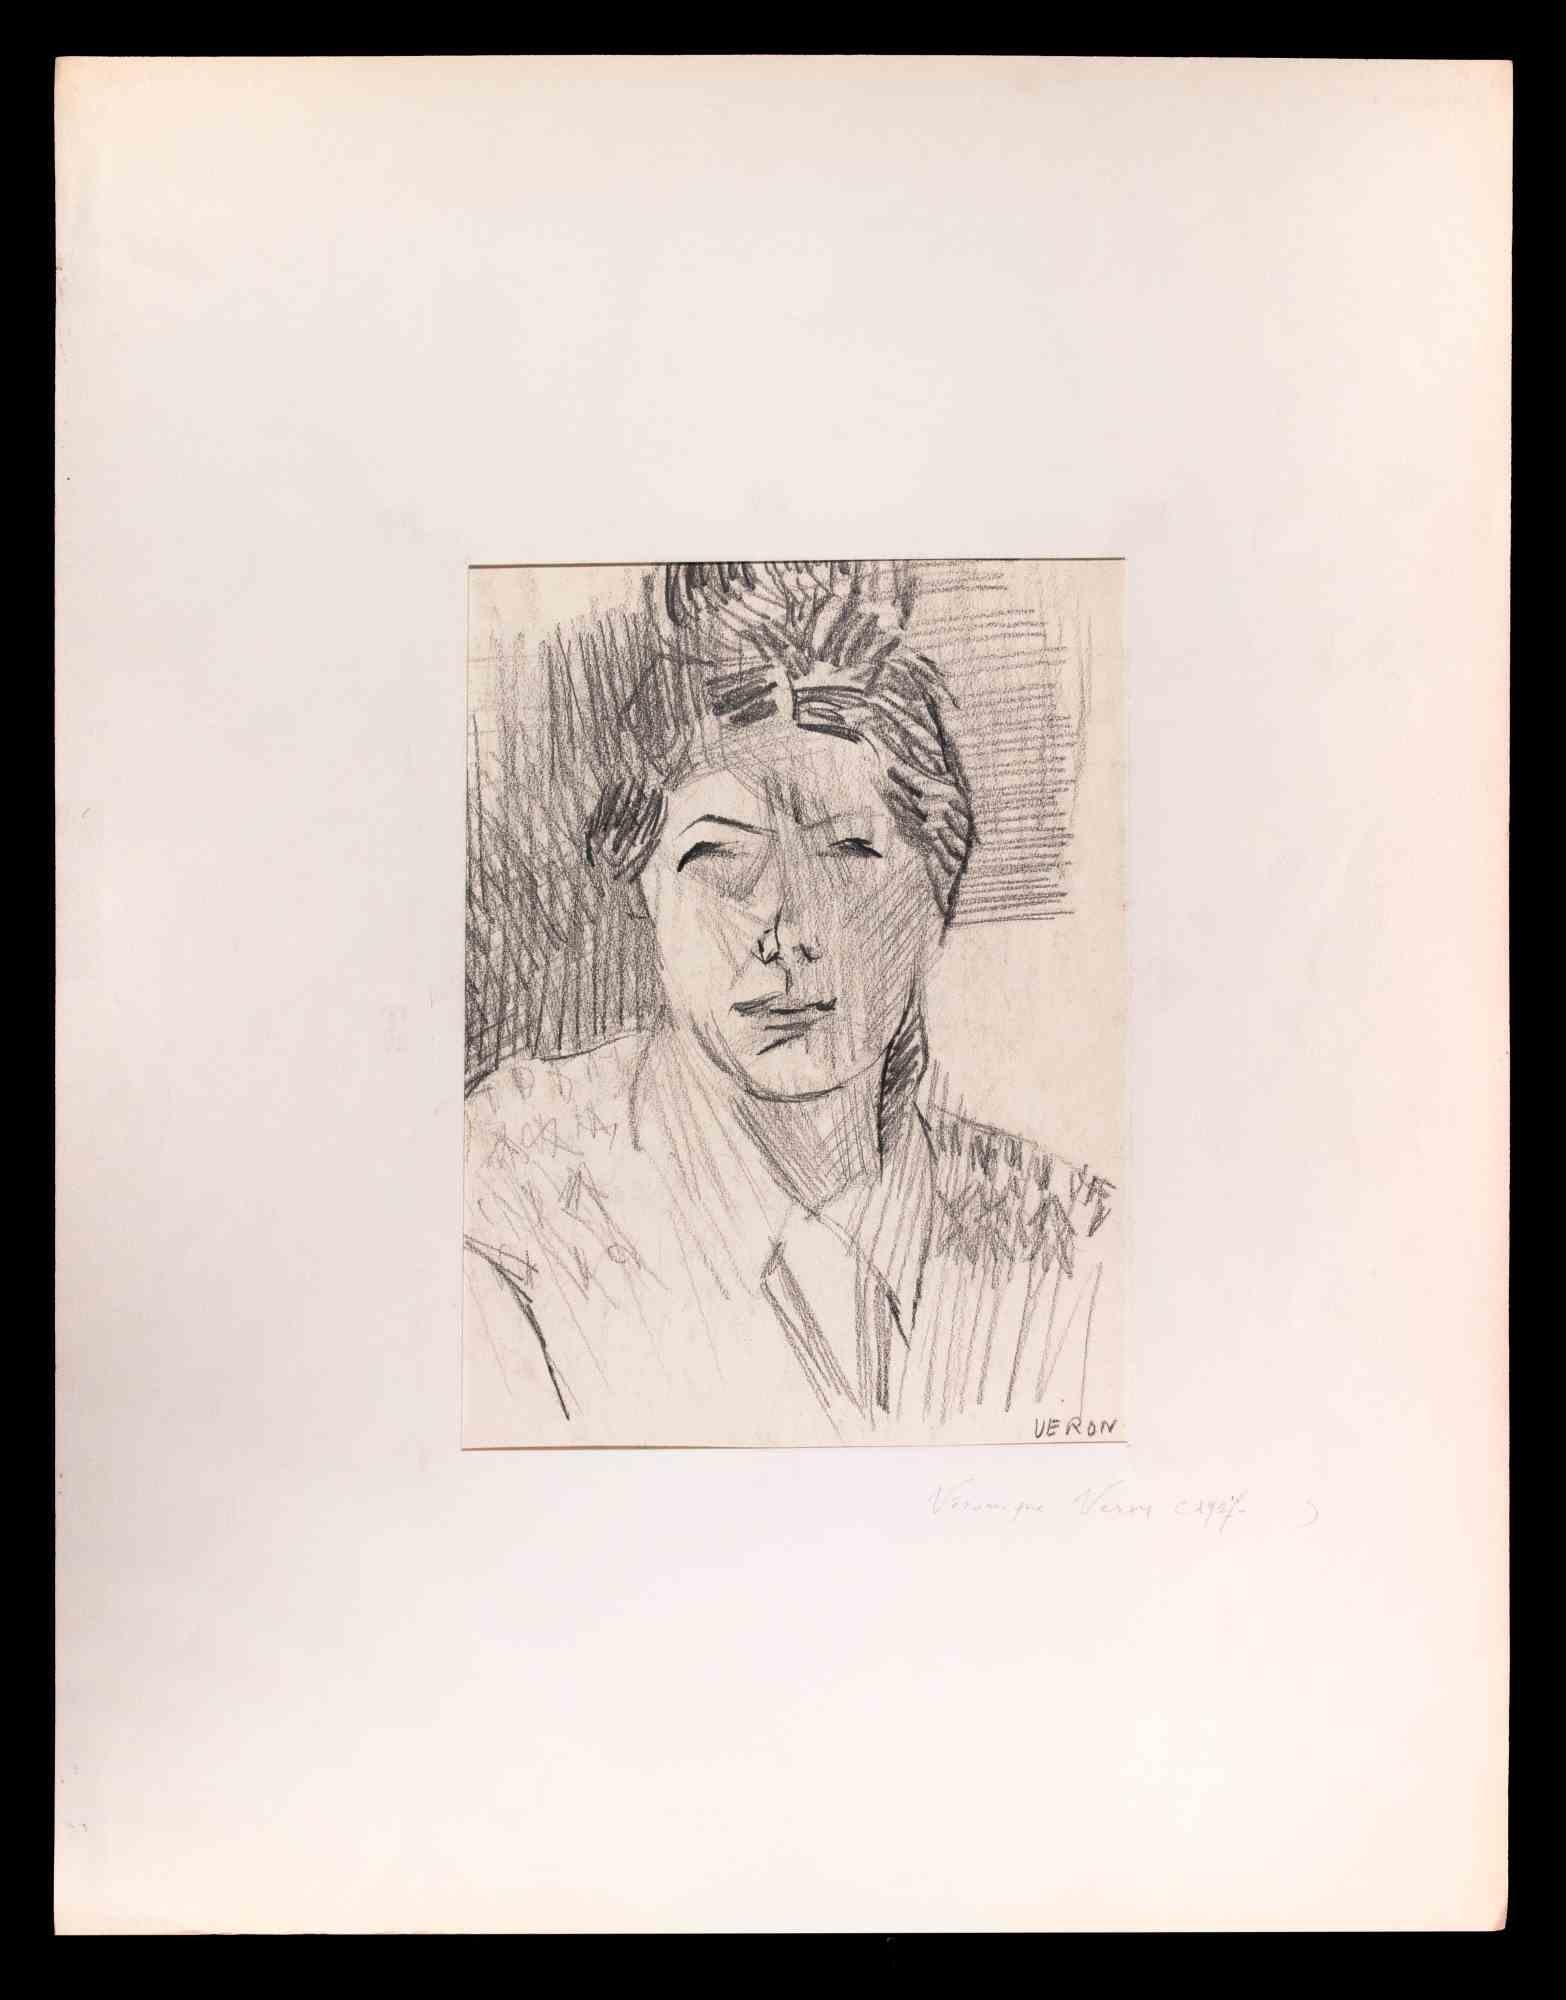 Portrait of  Woman is an original artwork realized by Véronique Veron  in about 1950. Pencil Drawing. Hand signed in pencil  on the lower right margin.

Passpartout cm 65x50.

Good Conditions.

Véronique Veron (1927)  was born in Budapest on May 10,